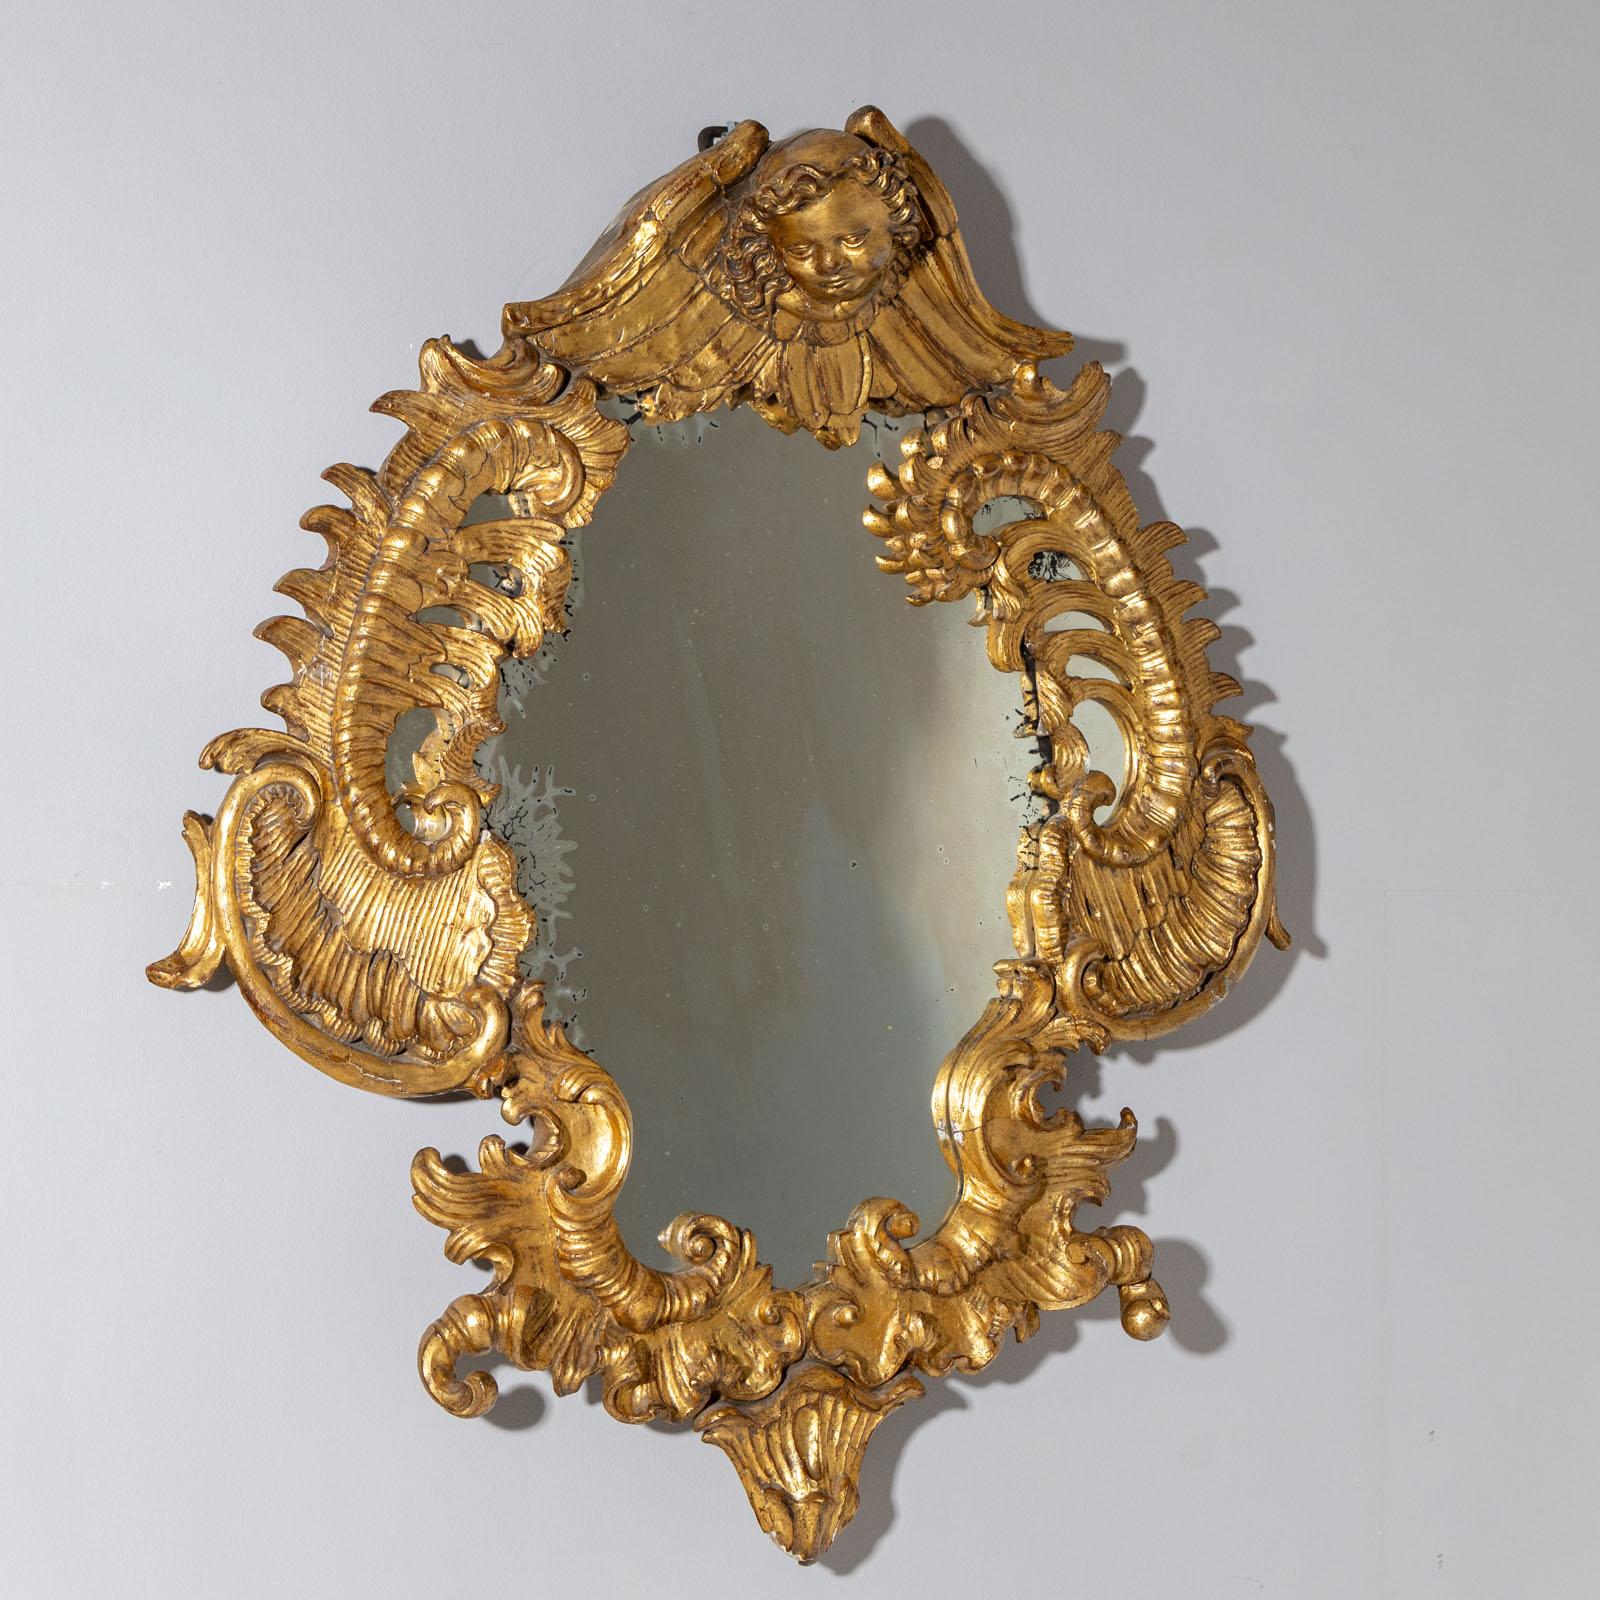 French Golden Rococo Wall Mirror, 2nd Half 18th Century For Sale